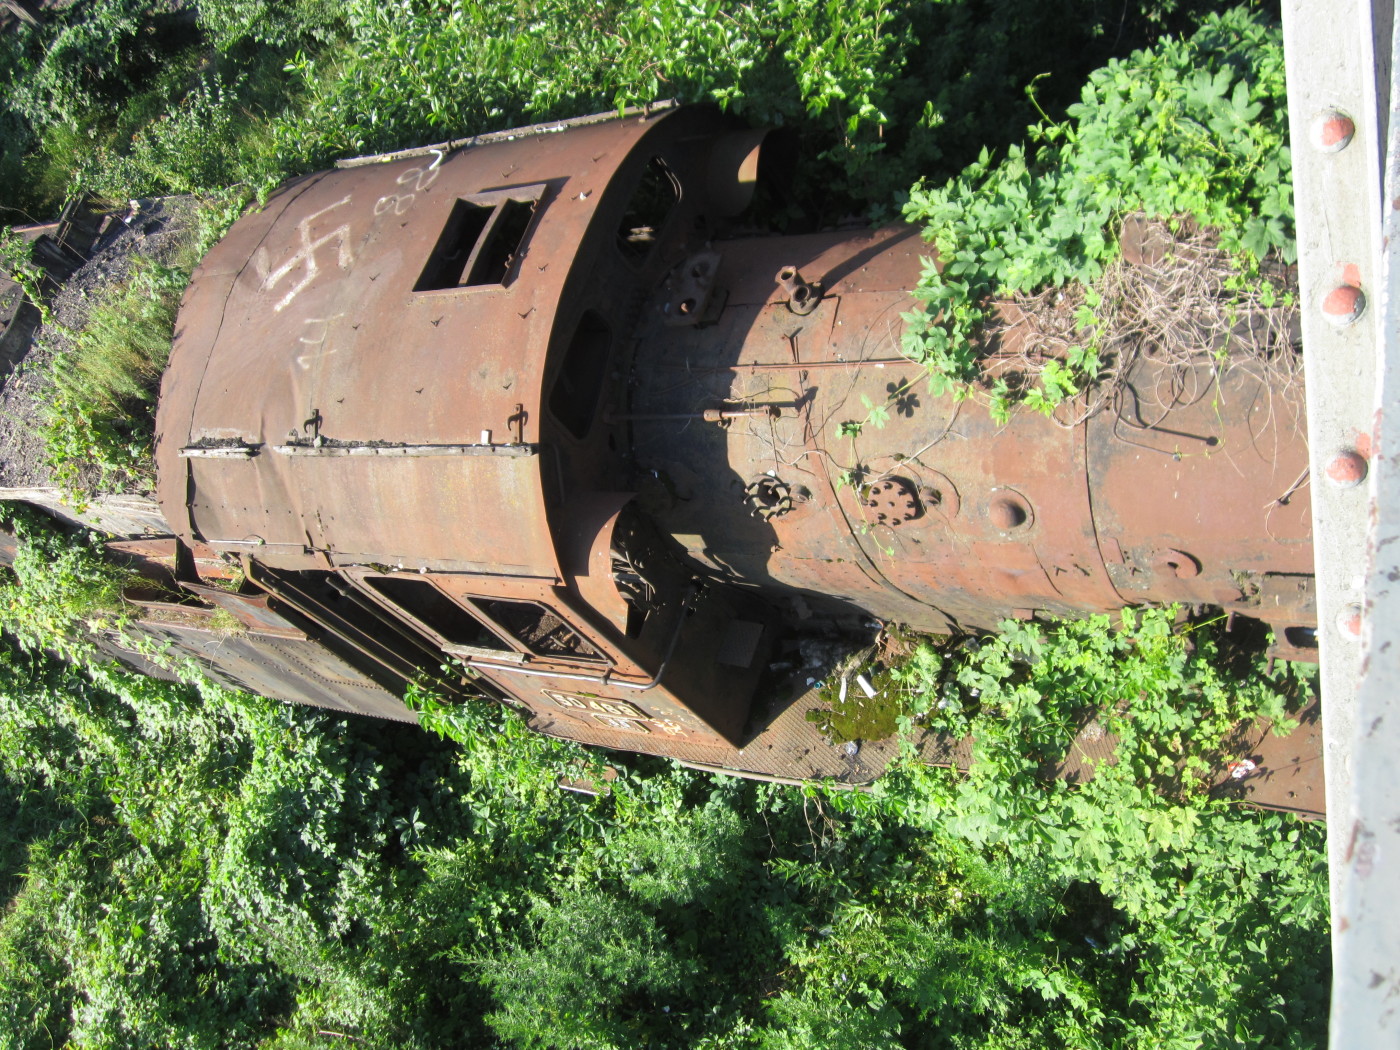 The site abounds in railway relics such as the one in image. Unfortunately, these industrial ruins  are left in a state of desertion.